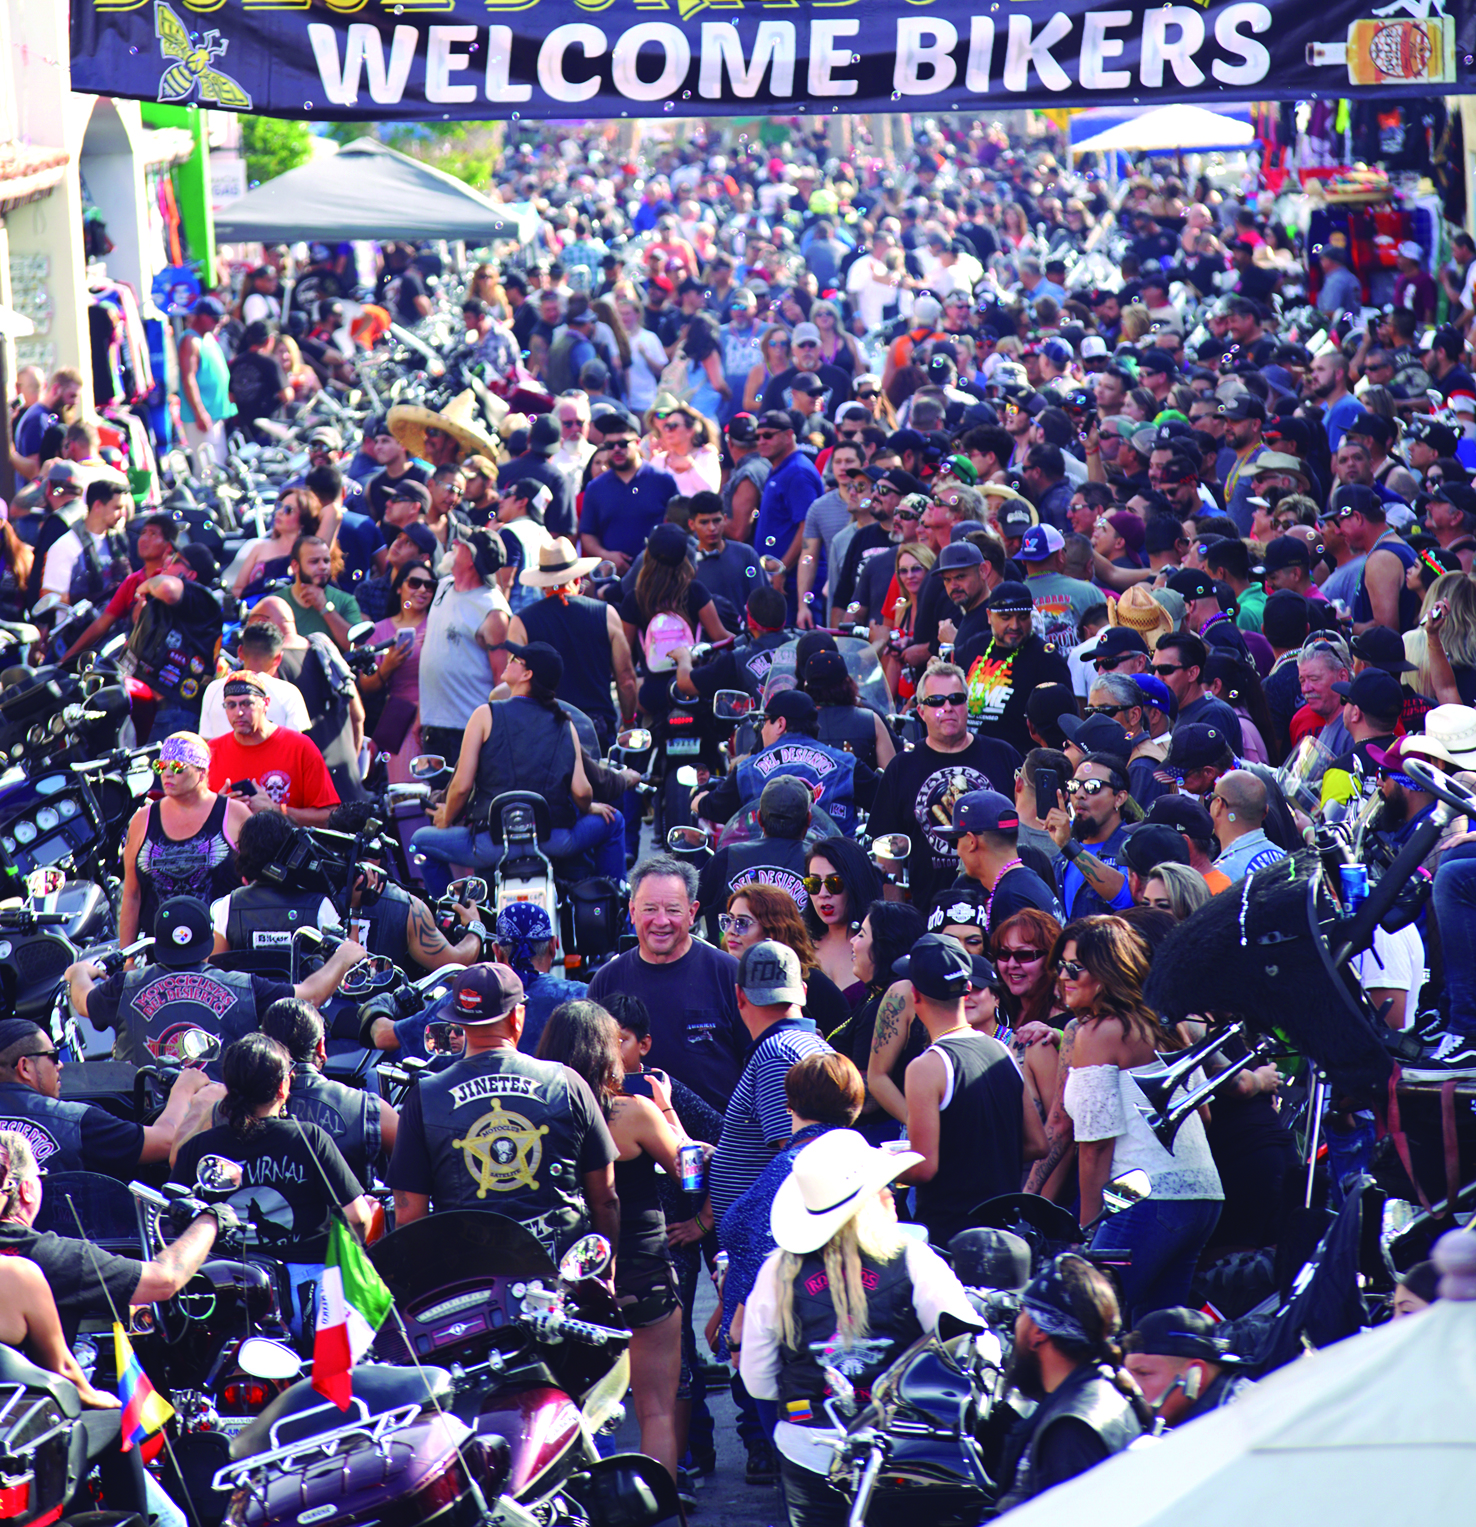 The 20th Annual Rocky Point Bike Rally